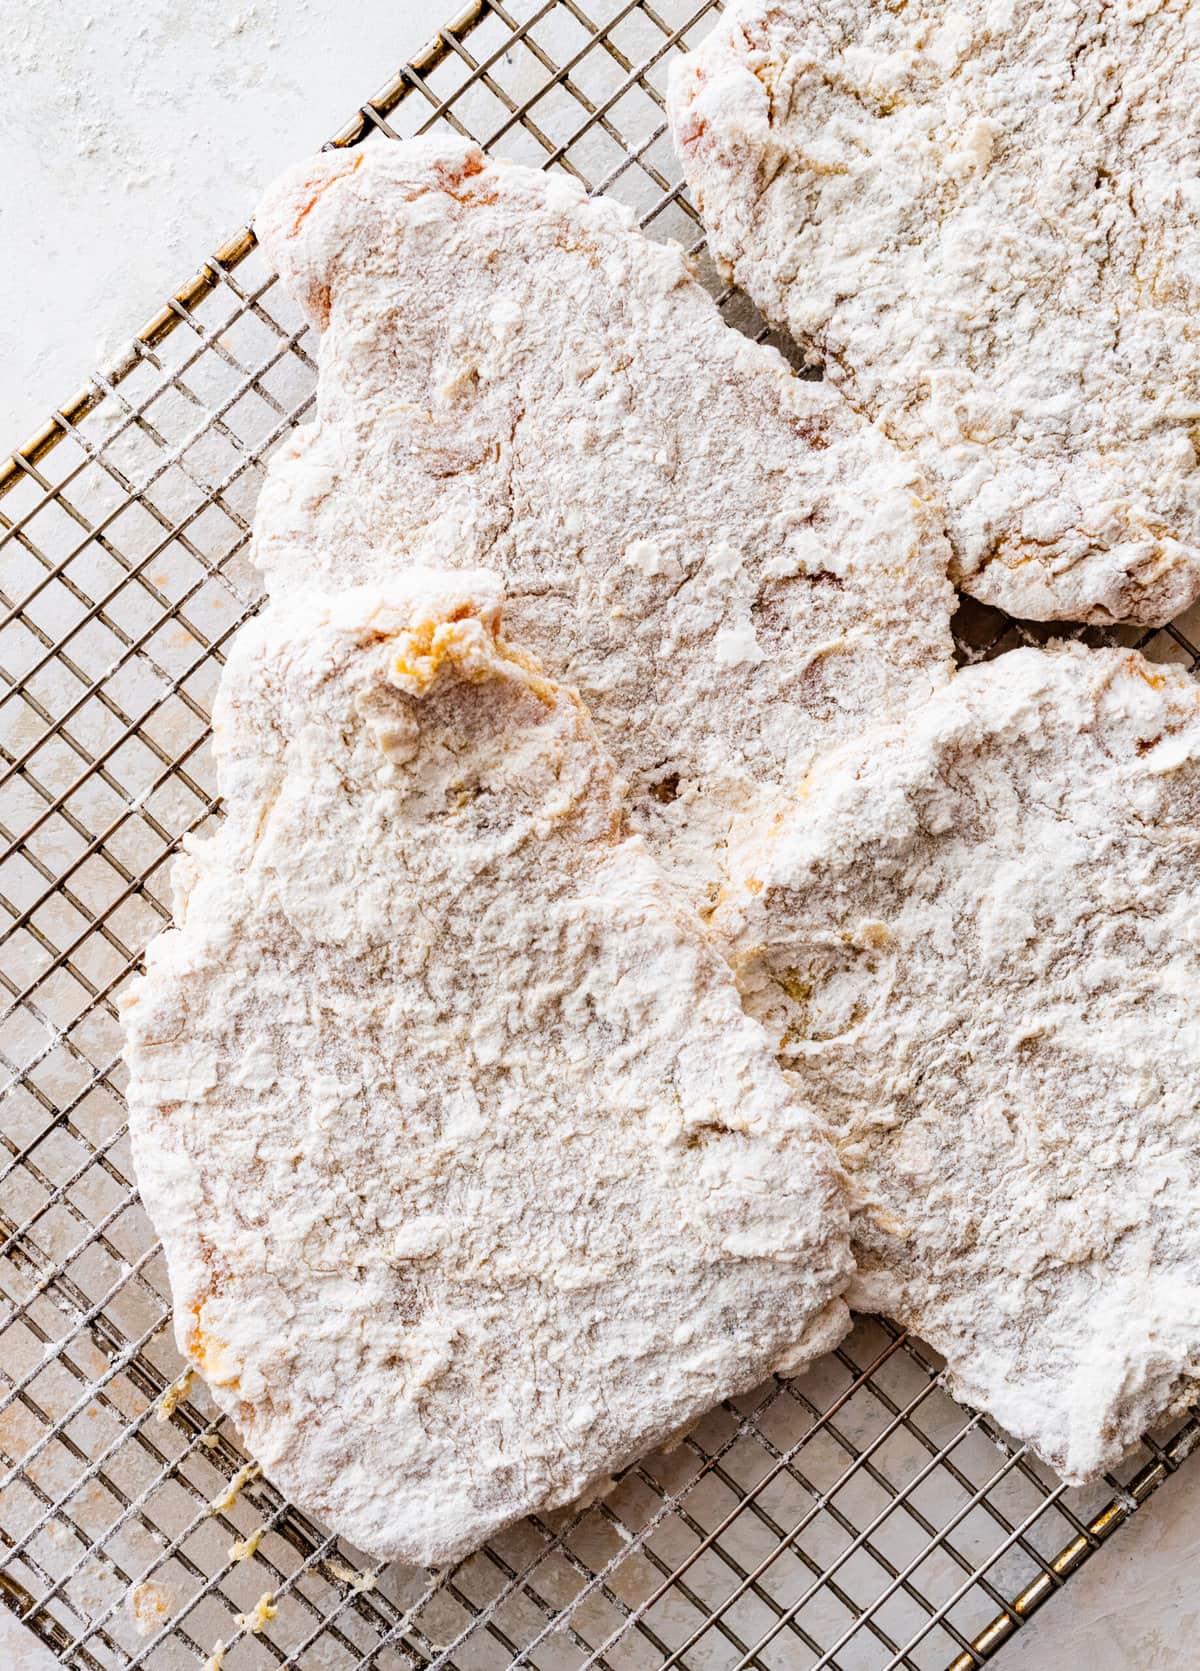 How to make crispy fried pork chops (step-by-step instructions)- coating in flour again before frying.